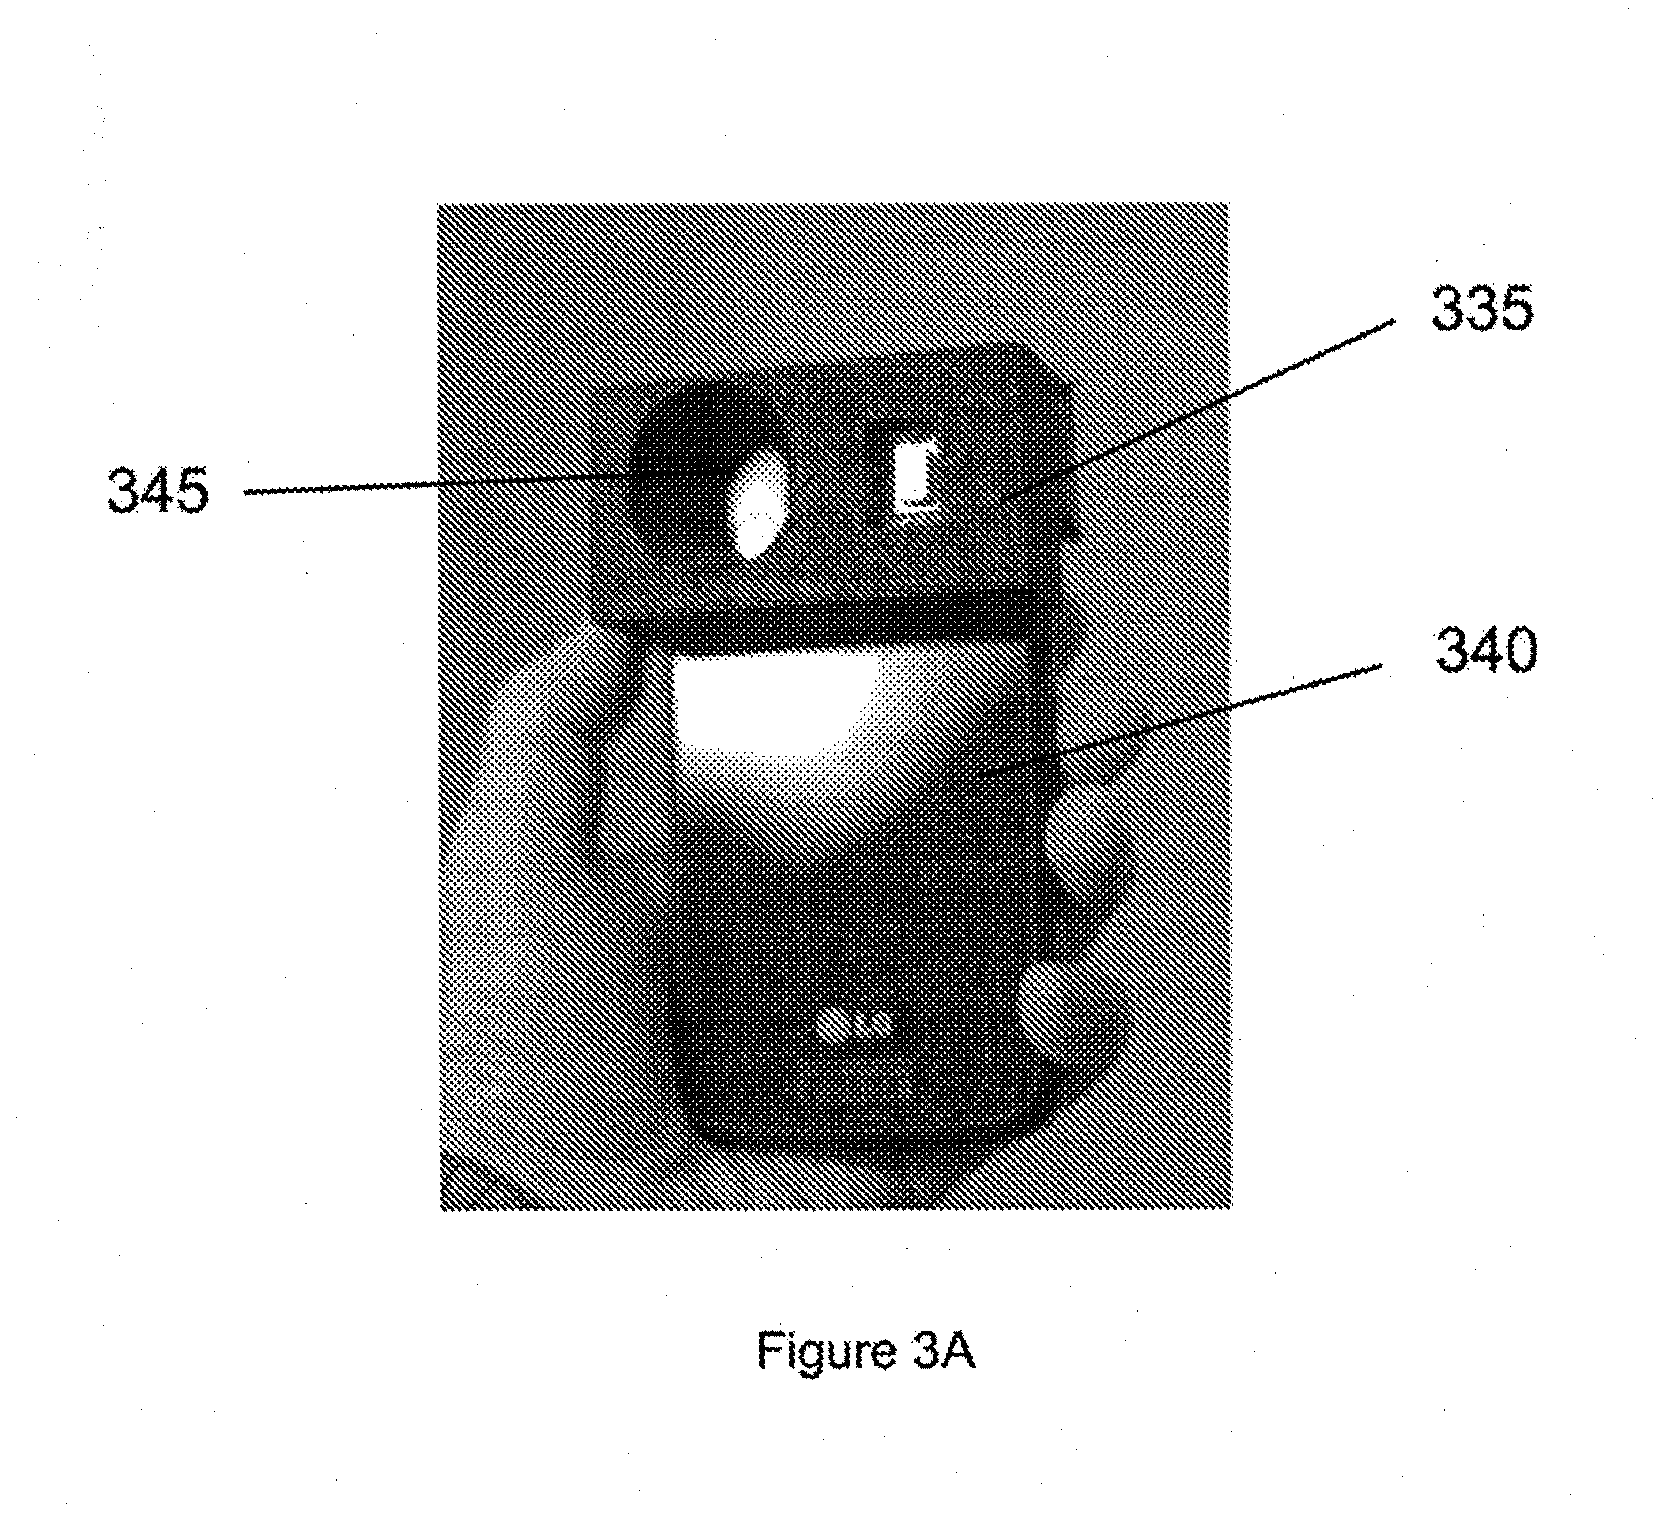 High-resolution thermal imaging system, apparatus, method and computer accessible medium